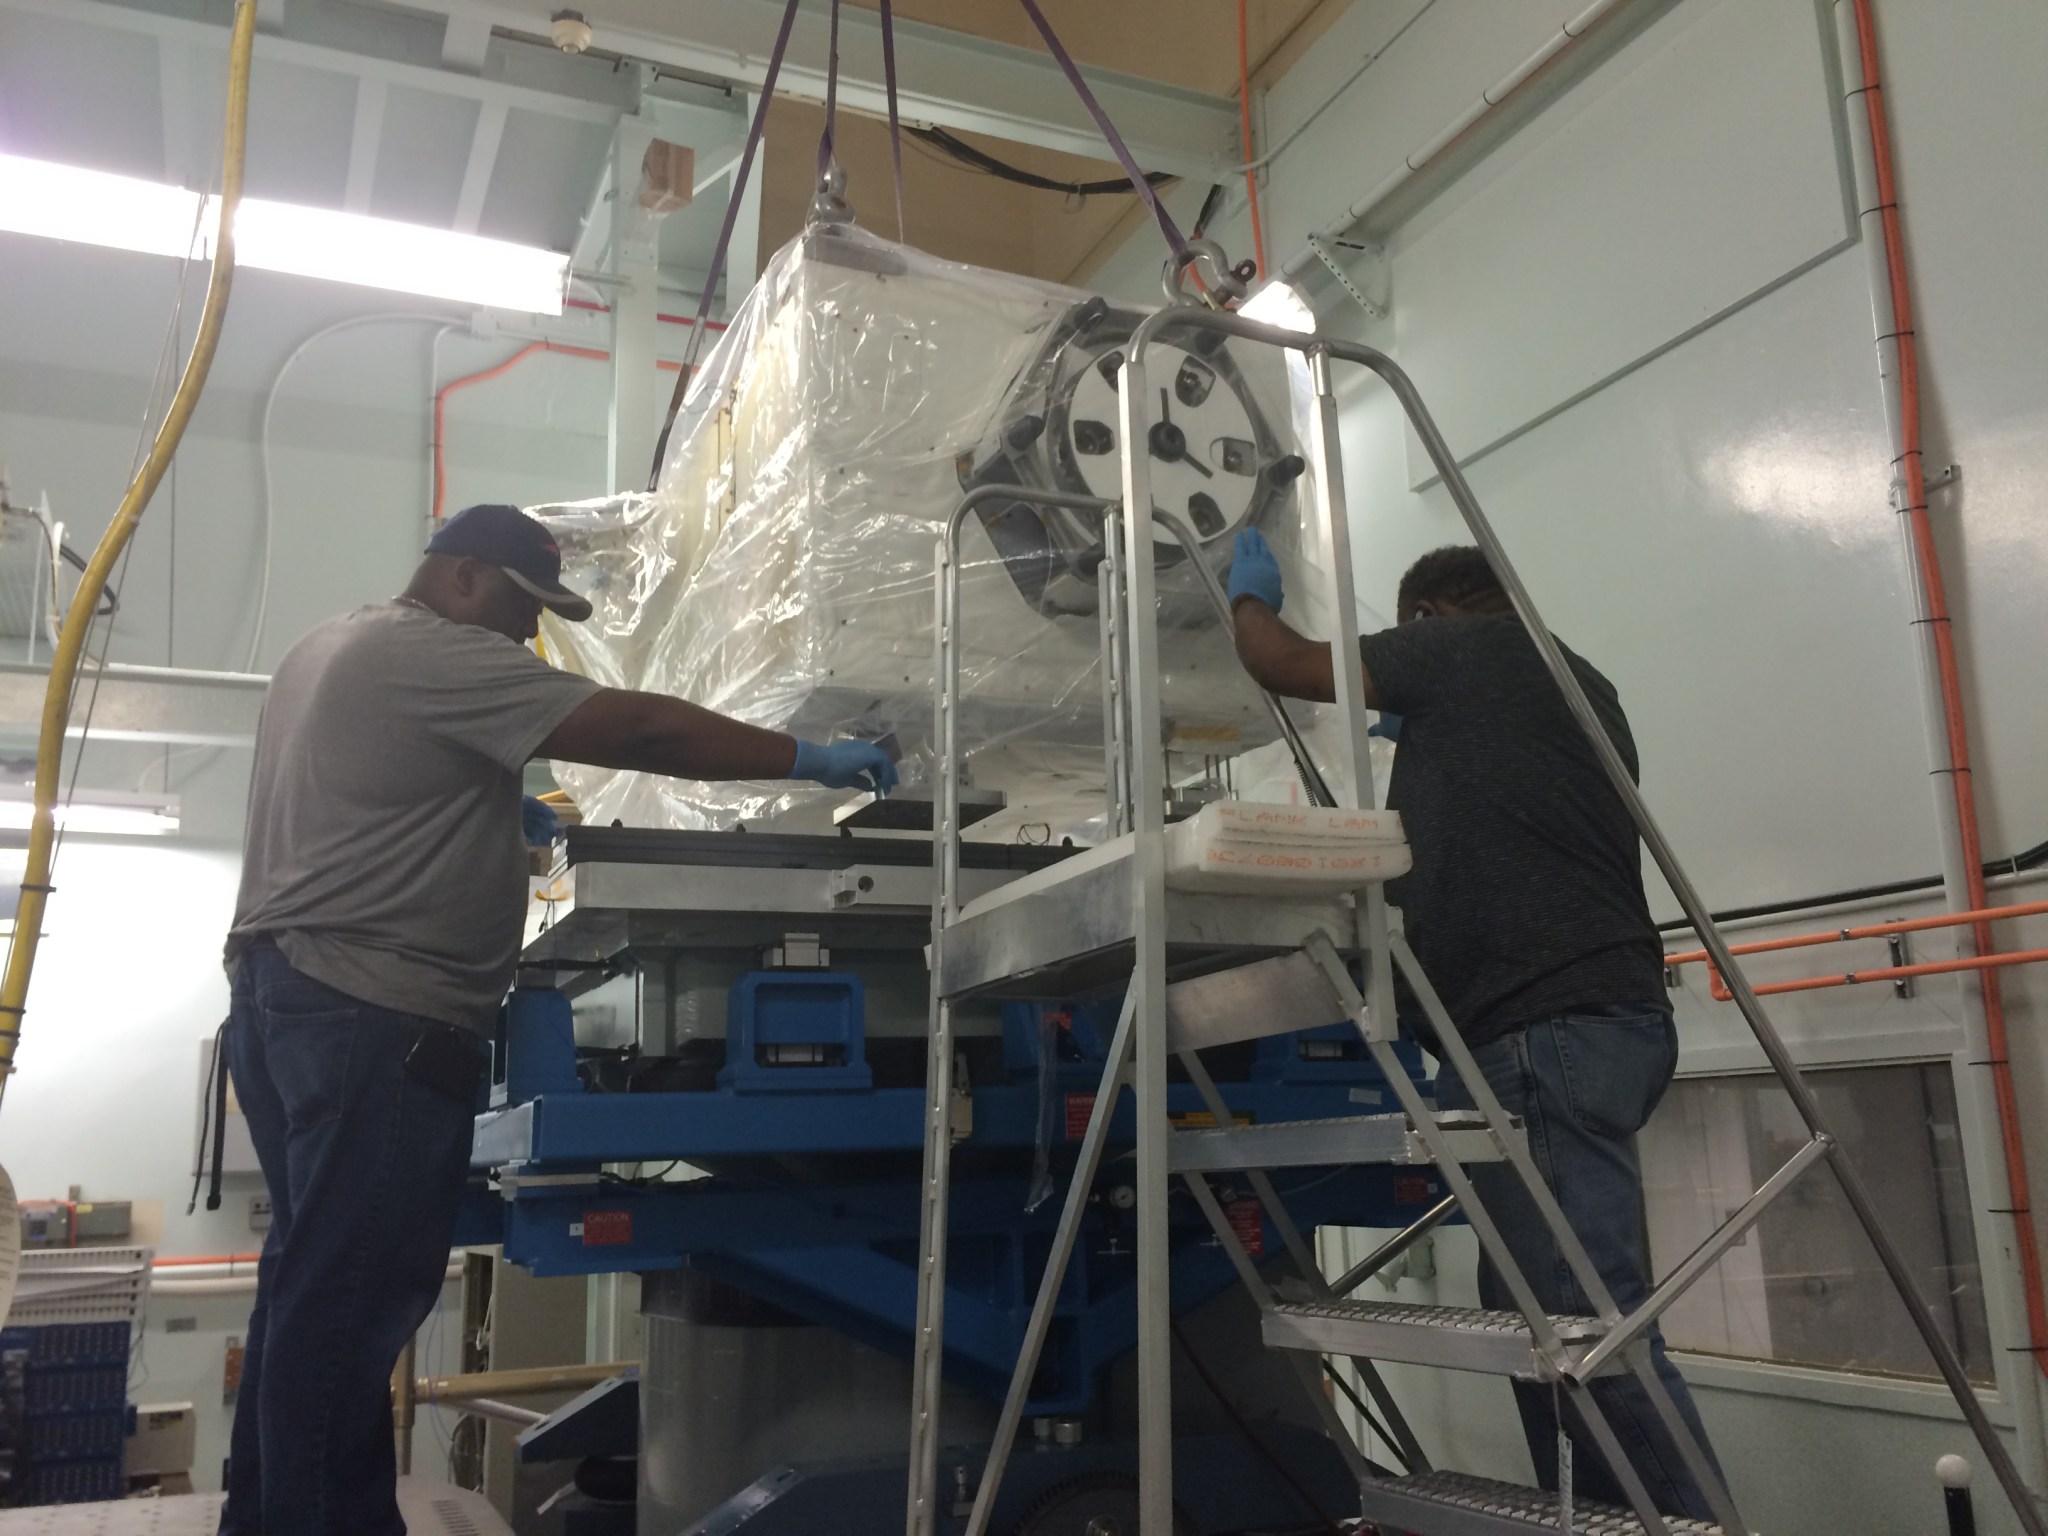 Preparing CREAM for Vibration Tests at the Greenbelt Facility.